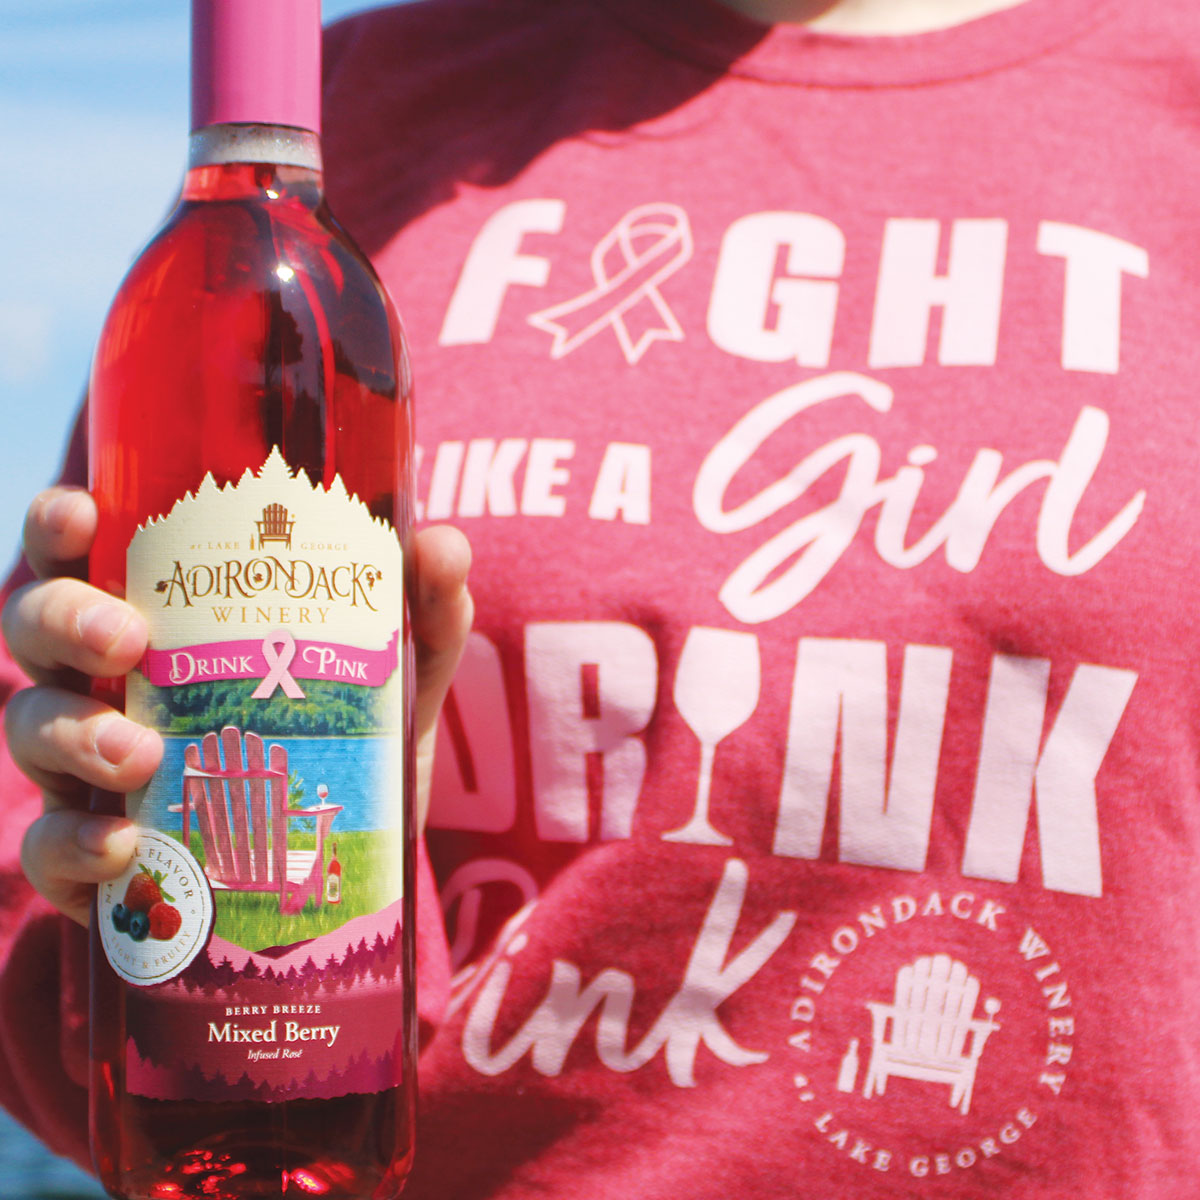 ADIRONDACK WINERY SETS $20,000 FUNDRAISING GOAL FOR 11TH ANNUAL DRINK PINK FUNDRAISER